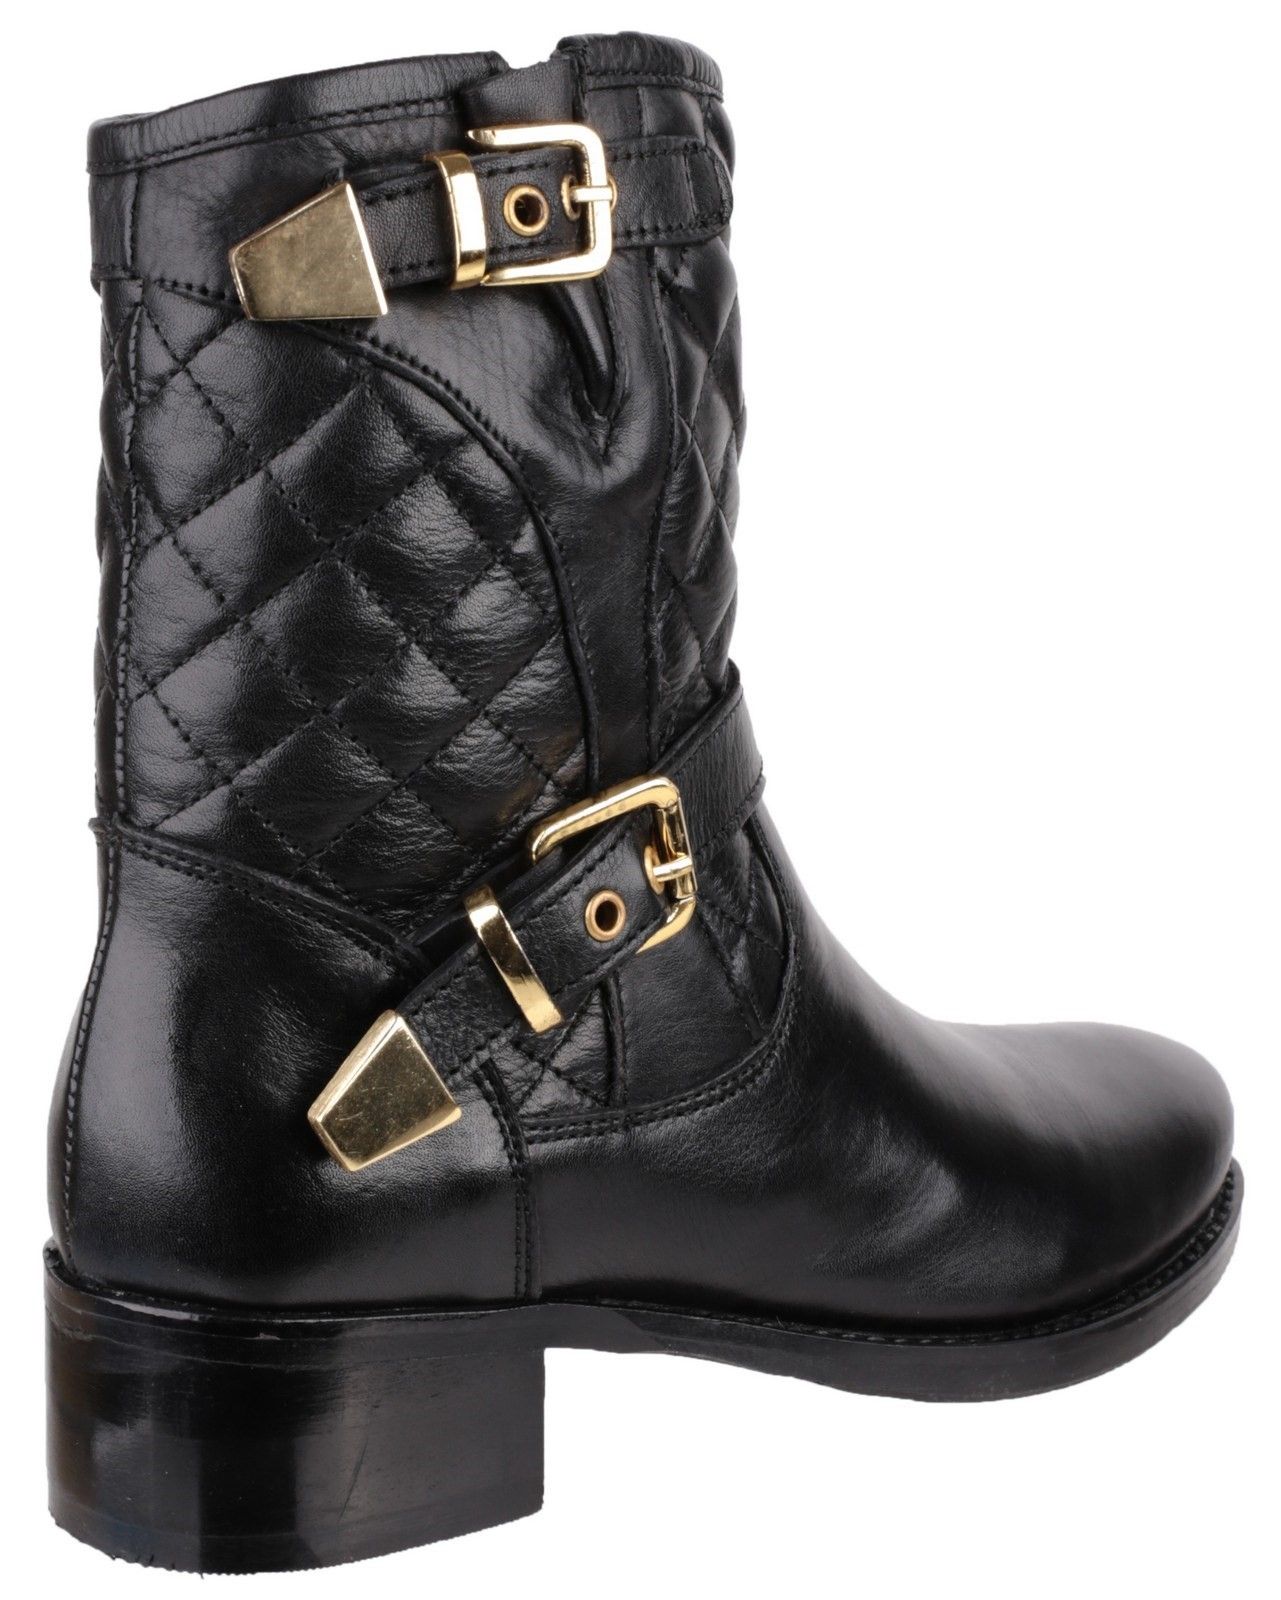 Ladies quilted boot with comfortable leather upper and twin buckle features.Elegy ladies quilted leather dress ankle boot. 
Stylish ladies dress ankle boot with quilted leather detailing around the ankle and twin buckle trim. 
The top buckle allows for some fit adjustment around the ankle and there is also a full inside zip for easy on and off.